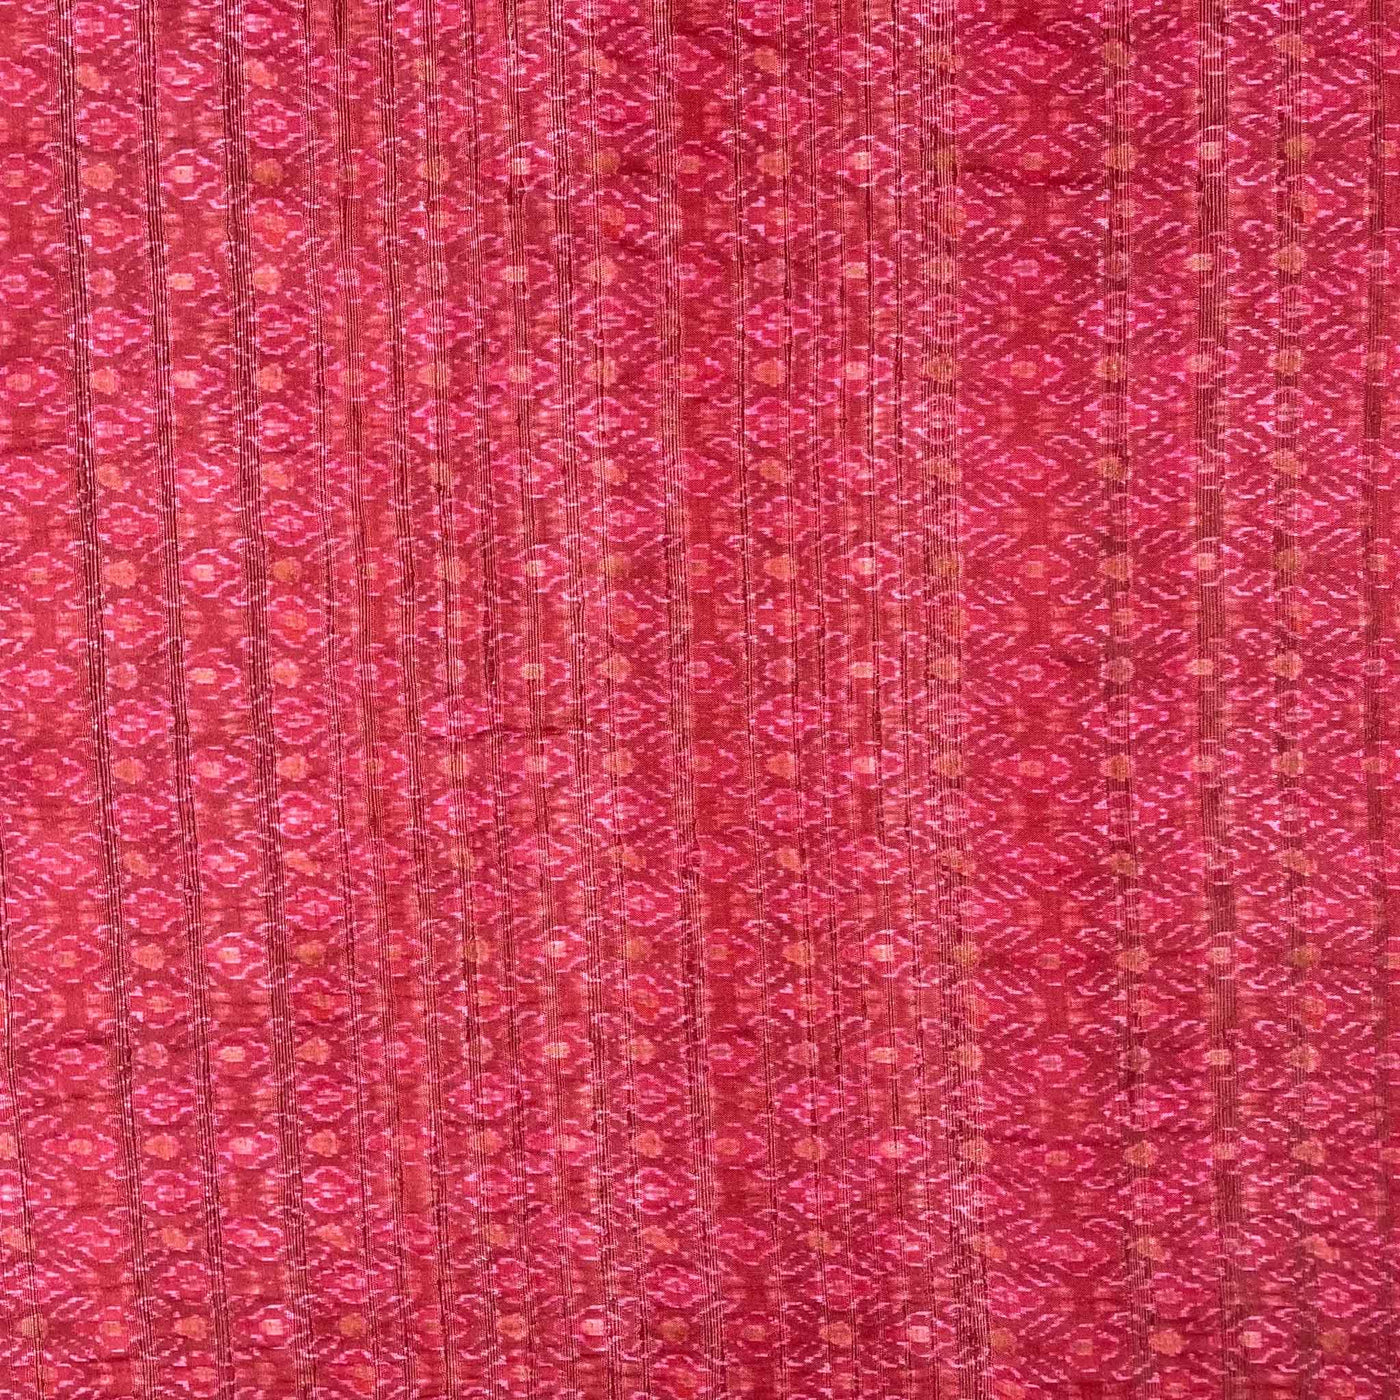 Fabric Pandit Fabric Peach Red Vintage Texture Digital Printed Tussar Silk Fabric (Width 44 Inches)